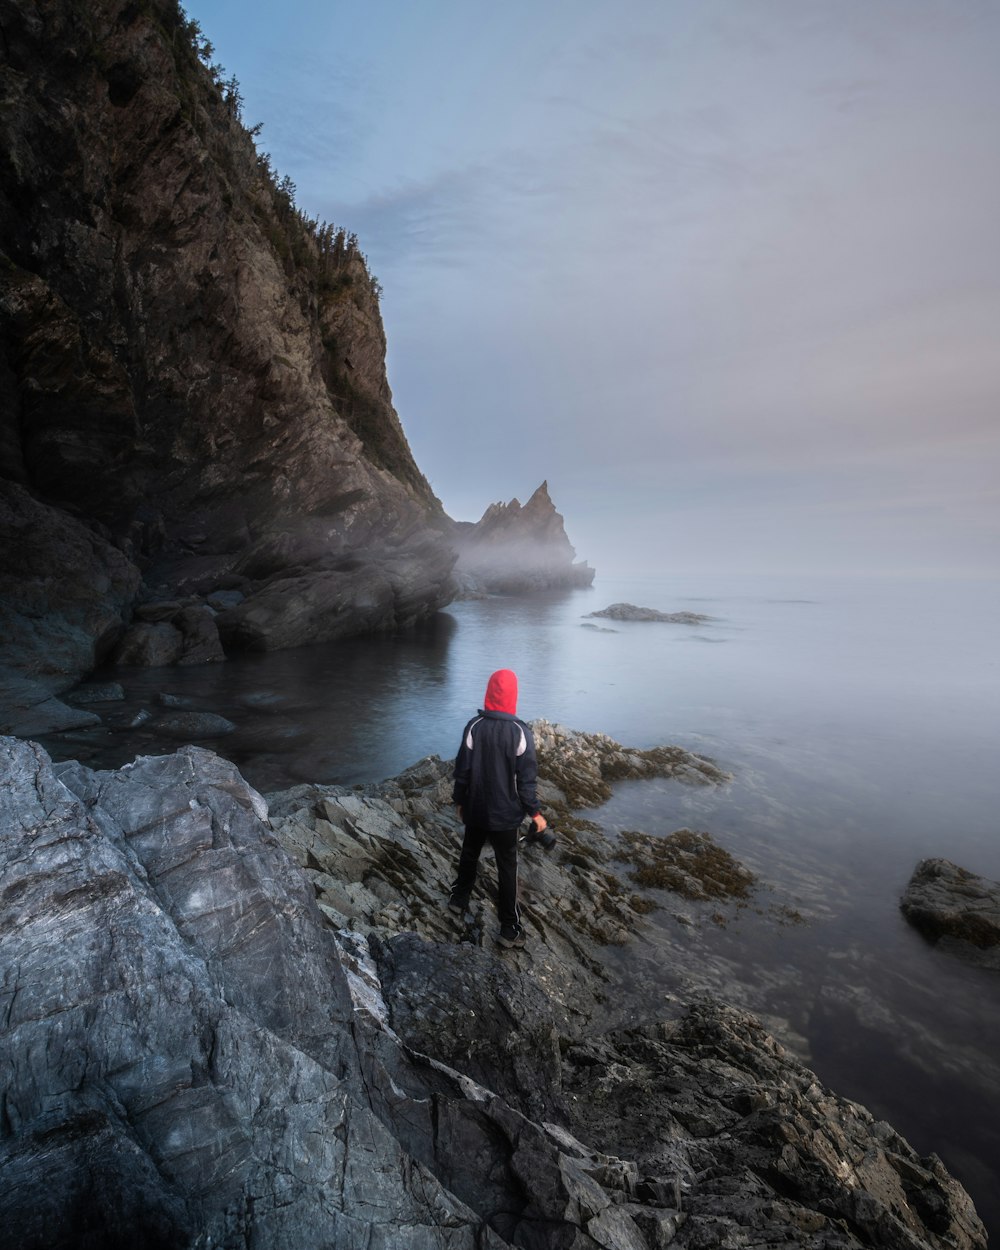 person in black jacket standing on rock formation near body of water during daytime